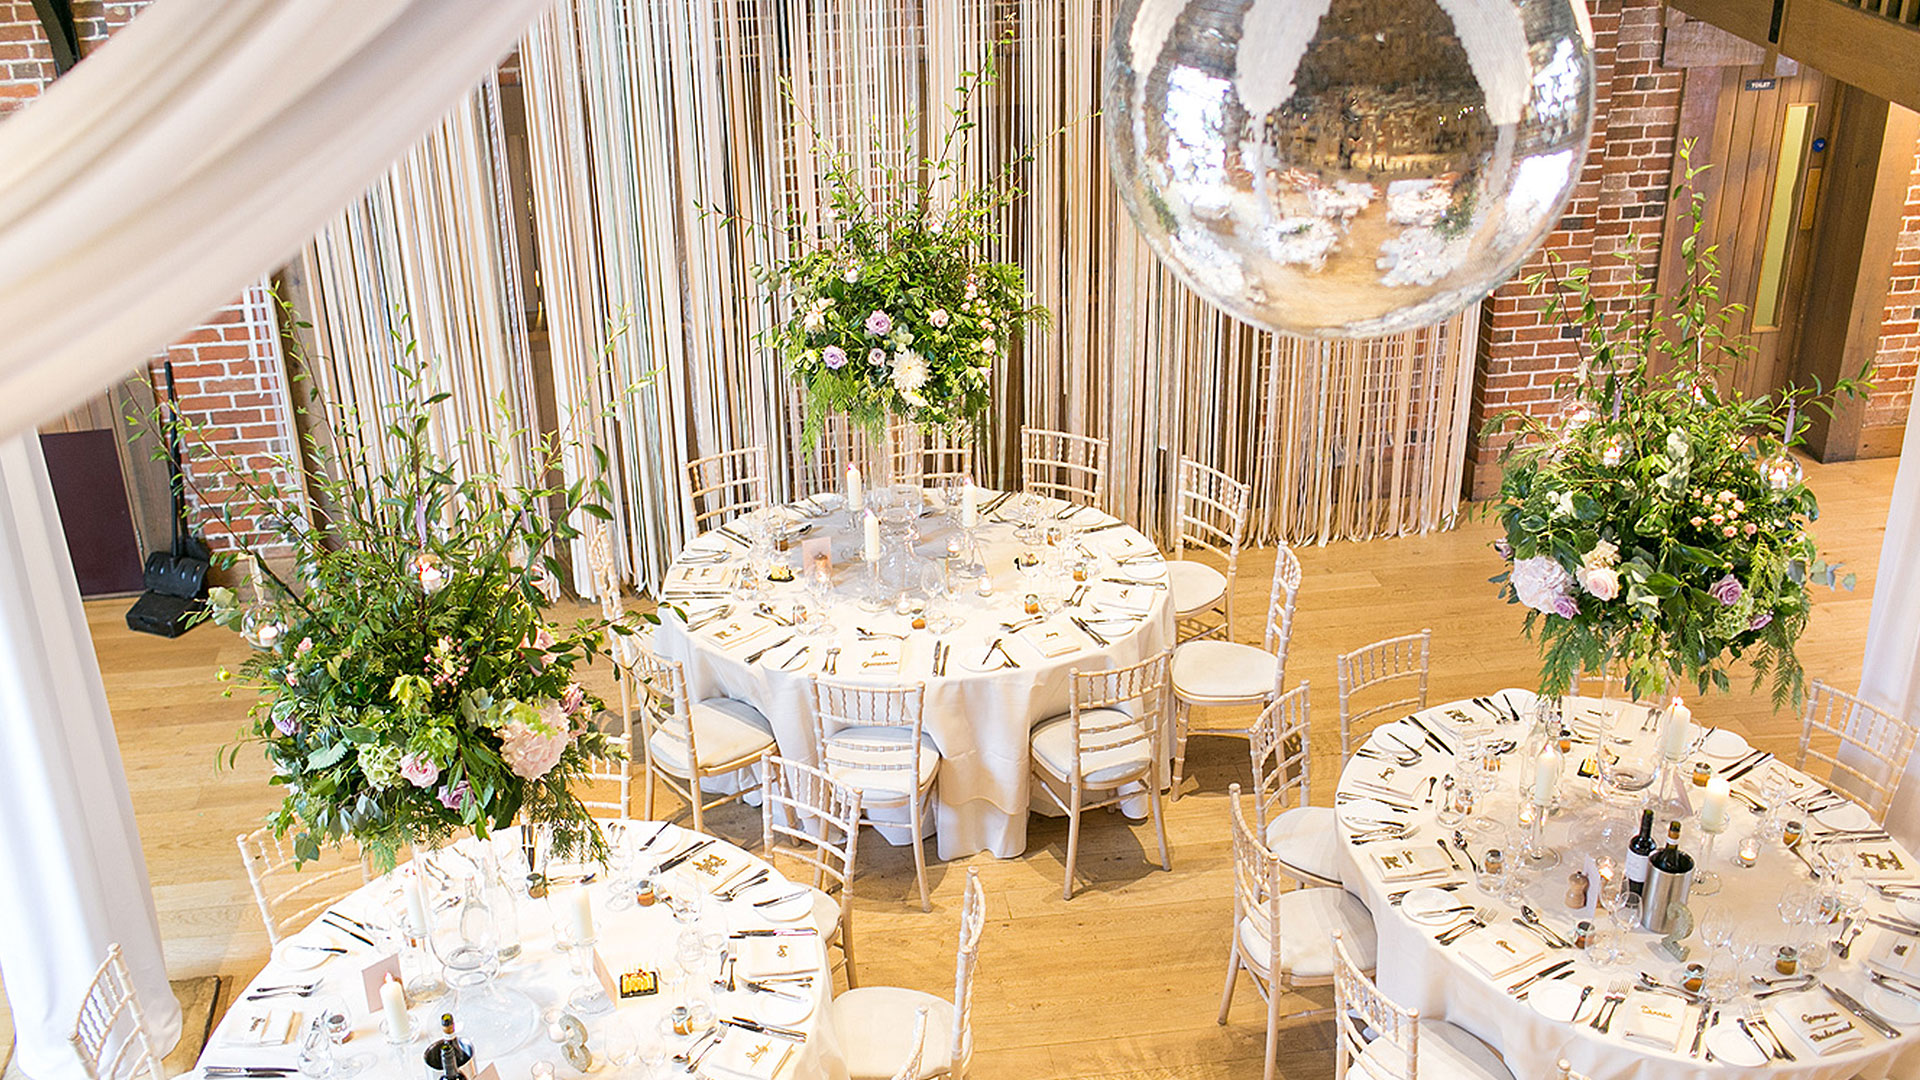 A disco ball hangs from the ceiling in this Essex barn wedding venue - wedding ideas